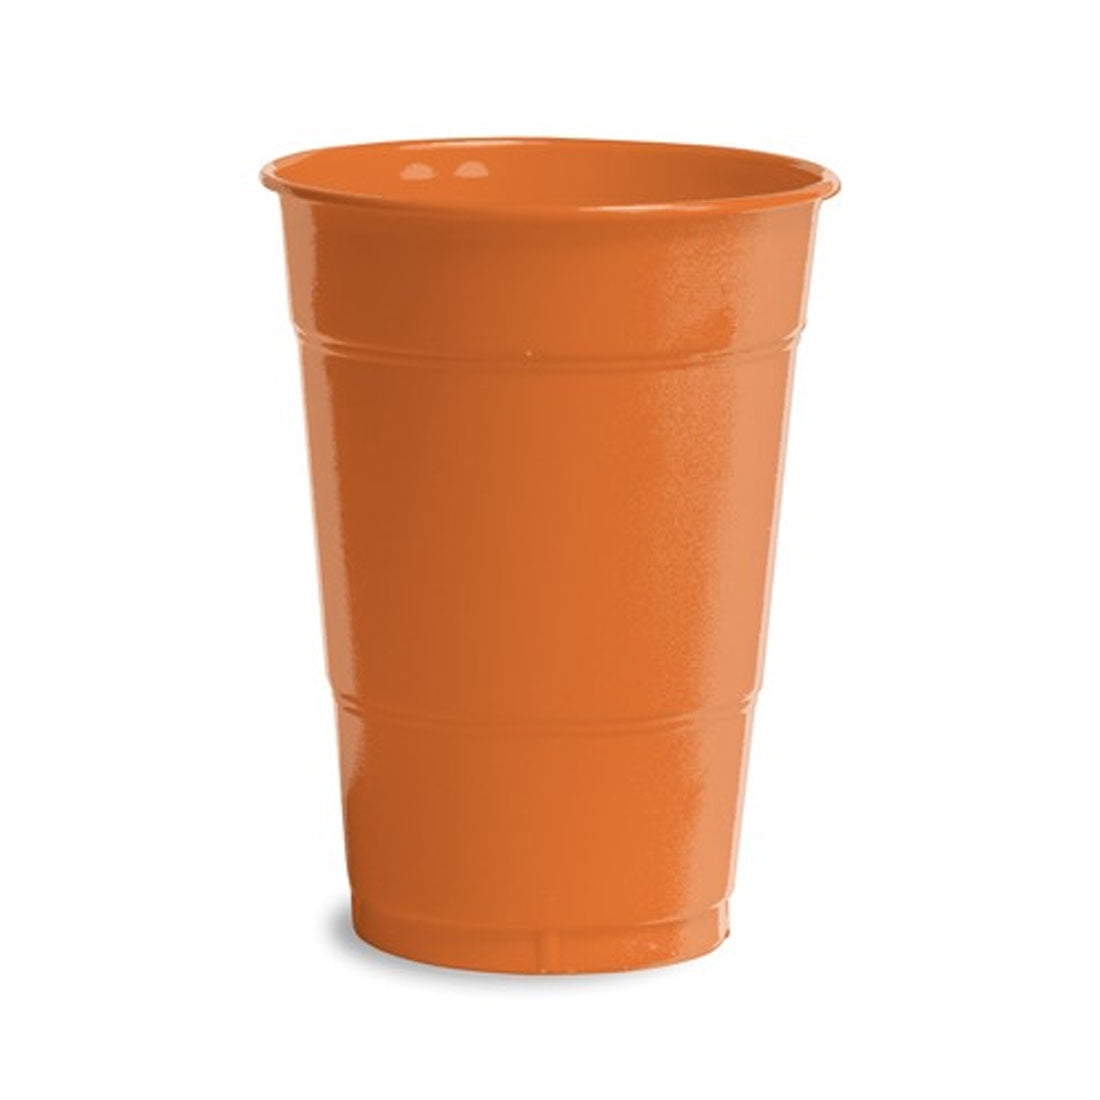 Sunkissed Orange 16 oz Plastic Cups 60 Count for 60 Guests